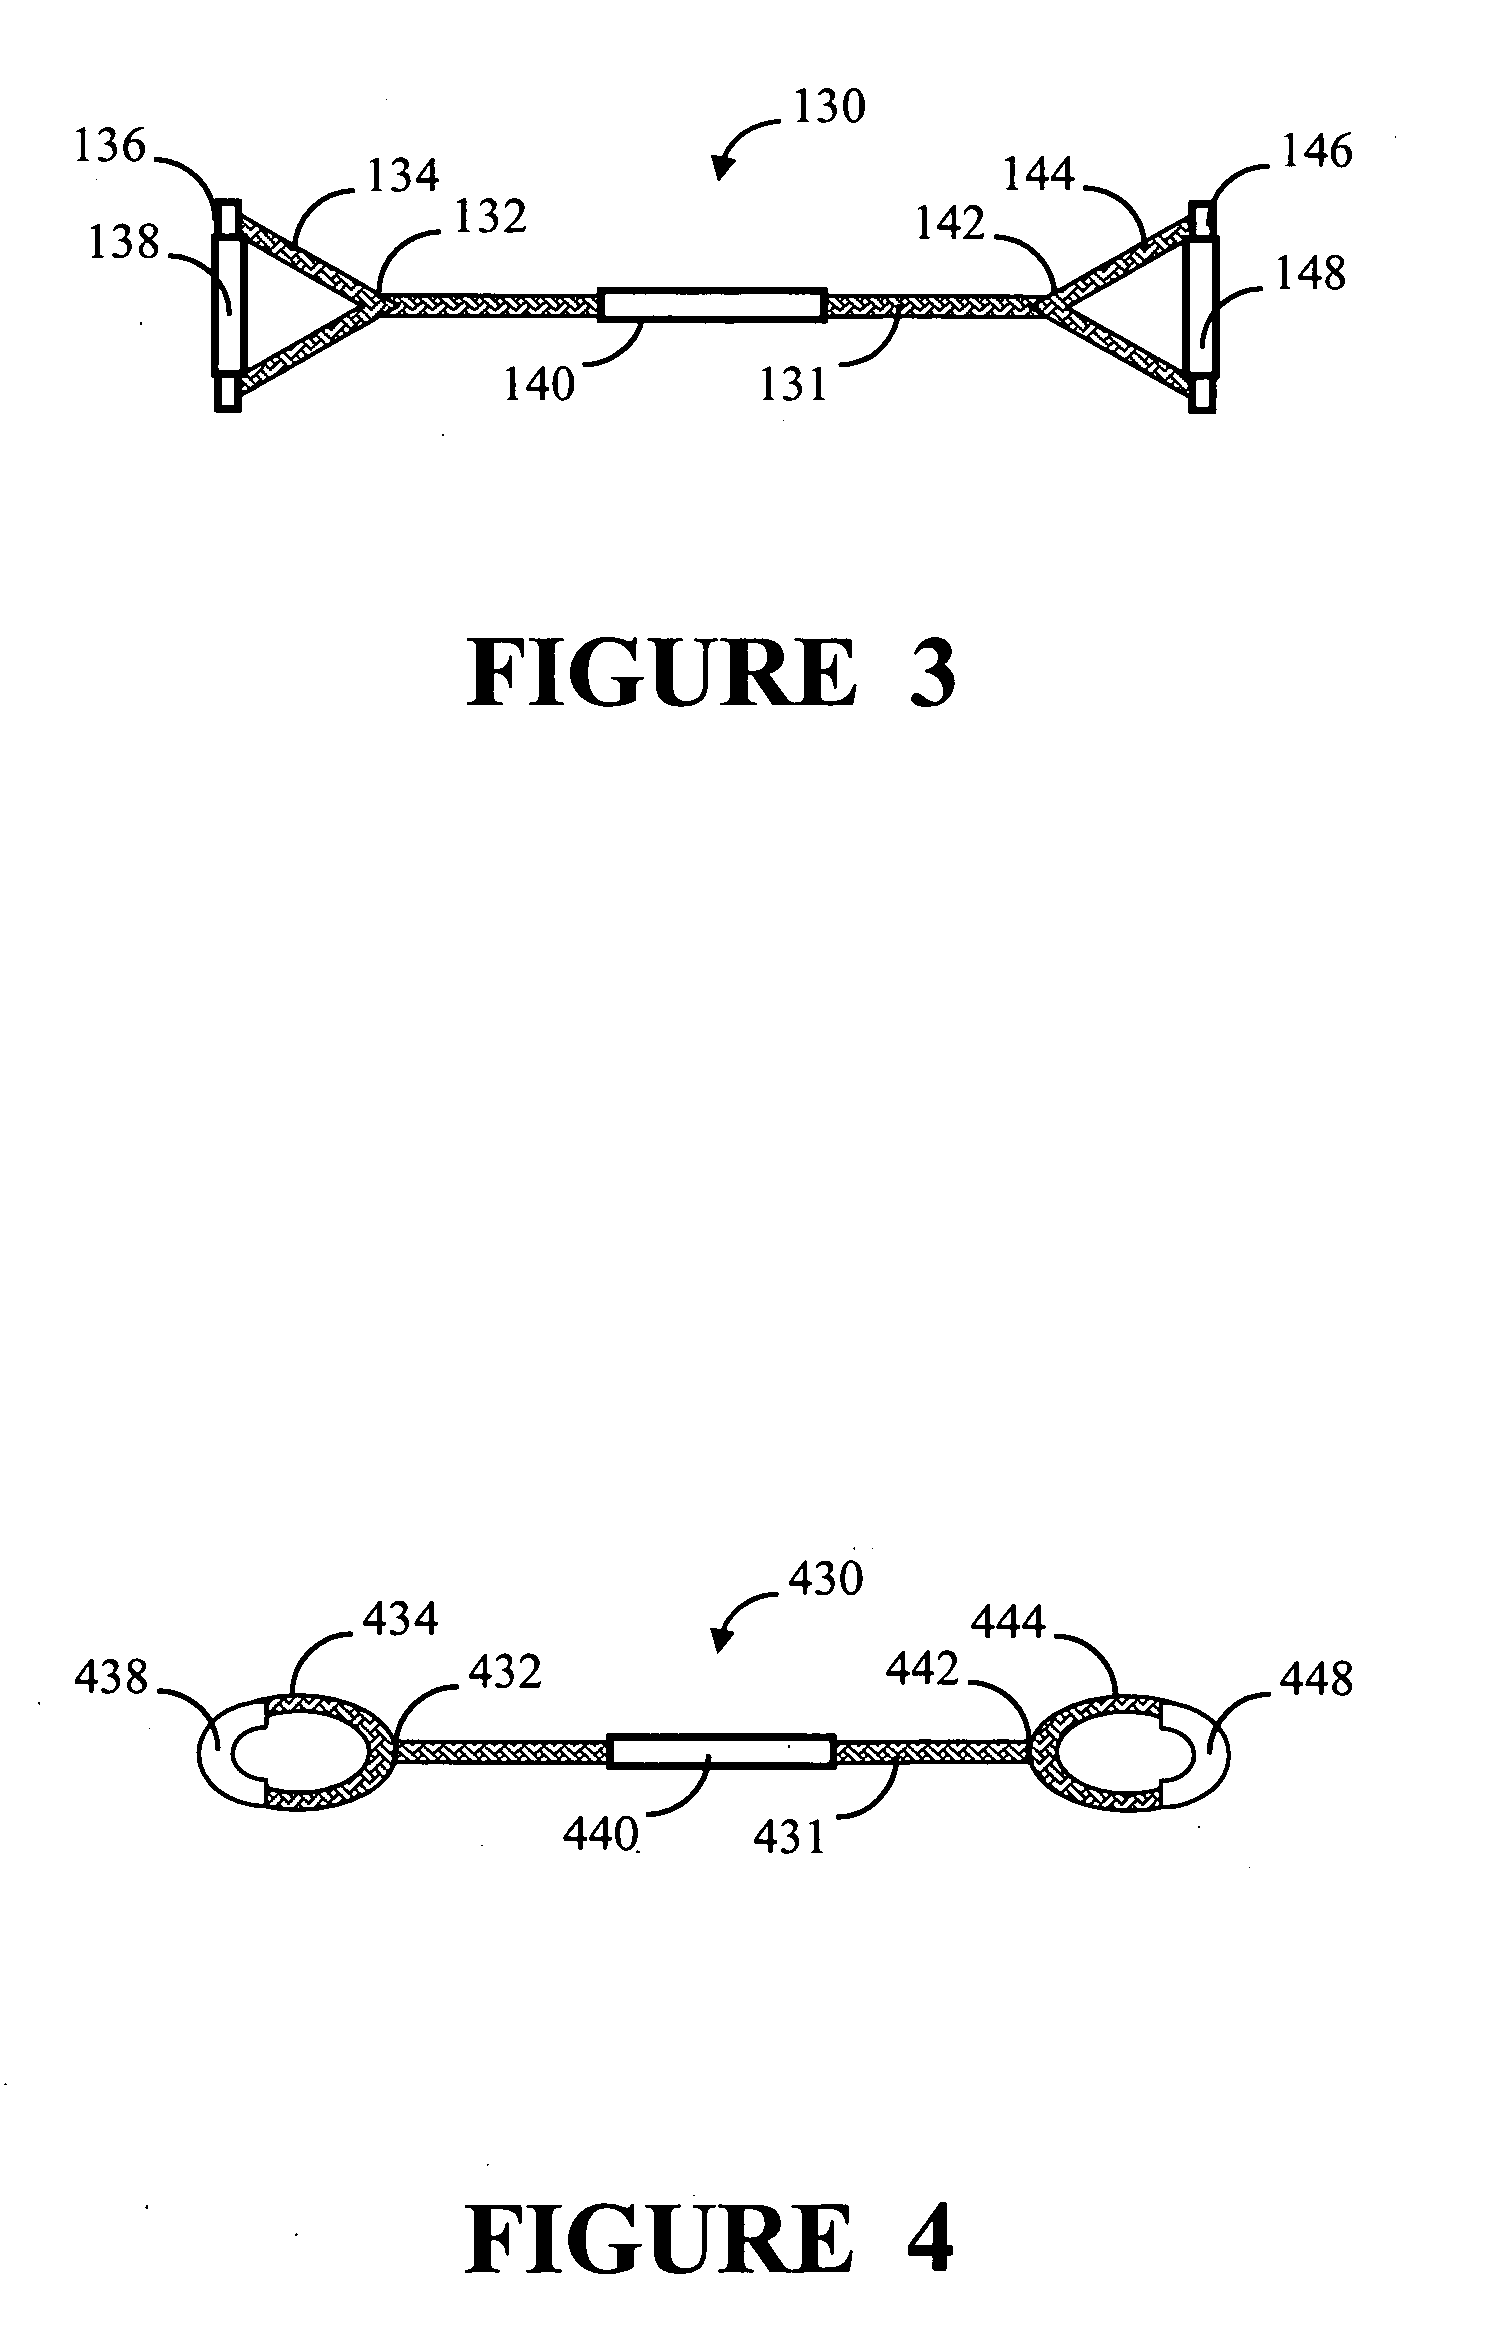 Second stage labor assist apparatus and method